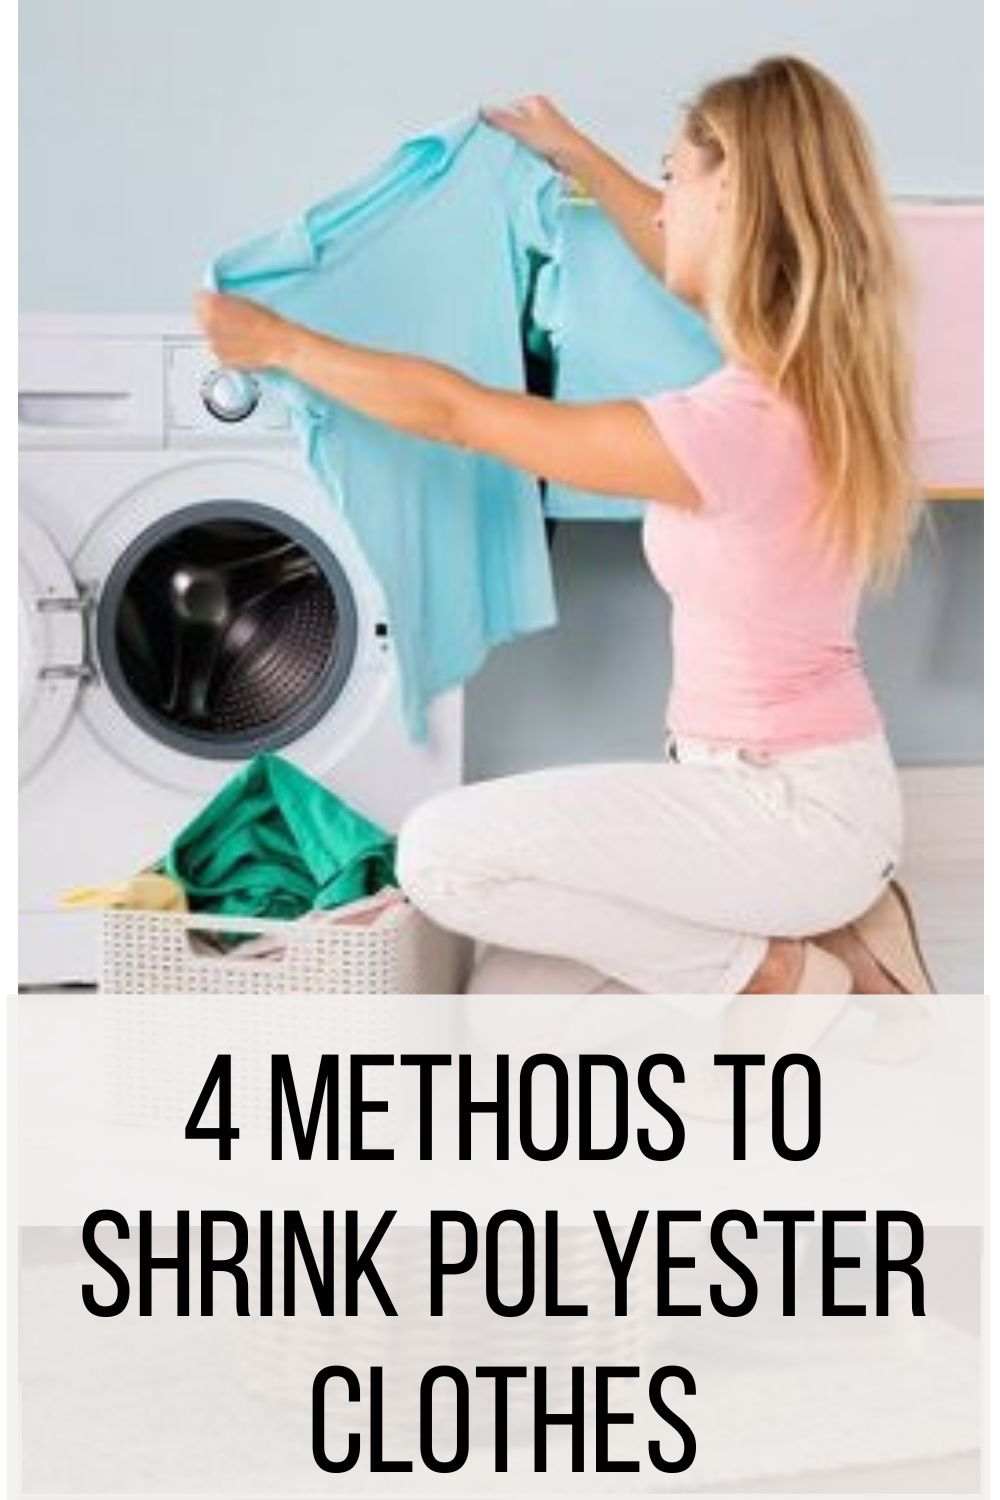 4 Methods to Shrink Polyester Clothes